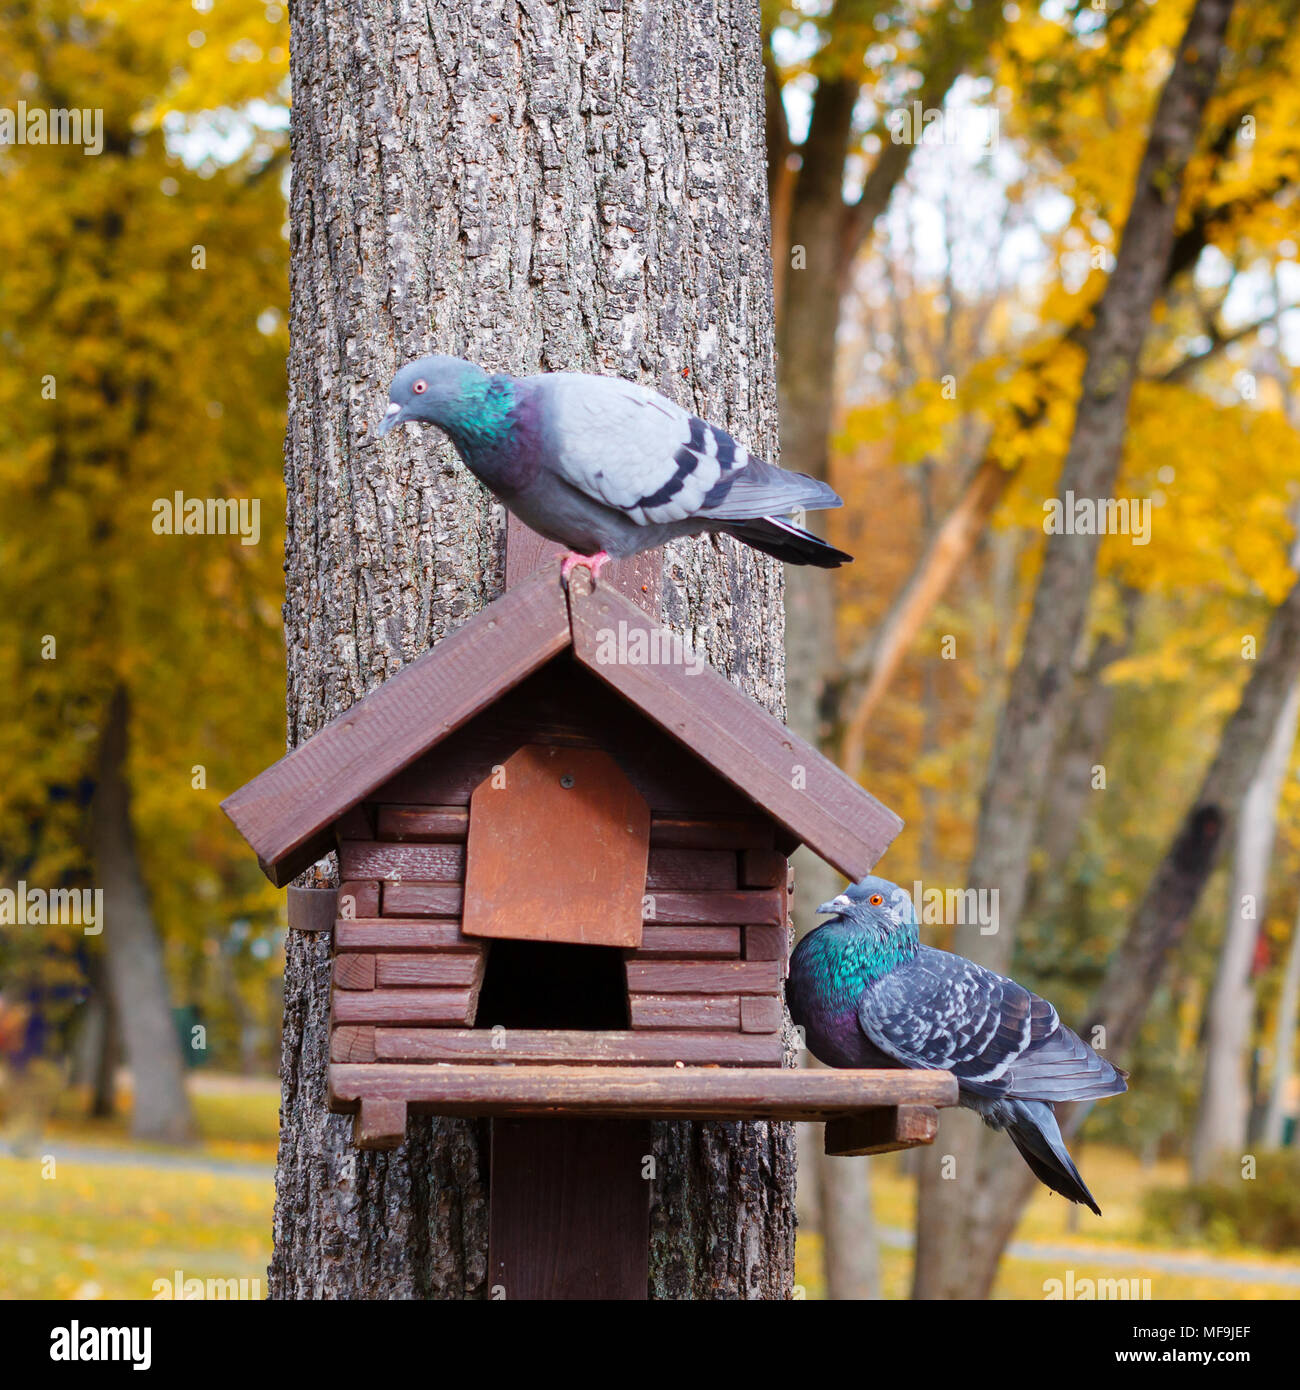 A house for birds or a squirrel on a tree. Birds in a birdhouse. An empty house for birds in the forest Stock Photo